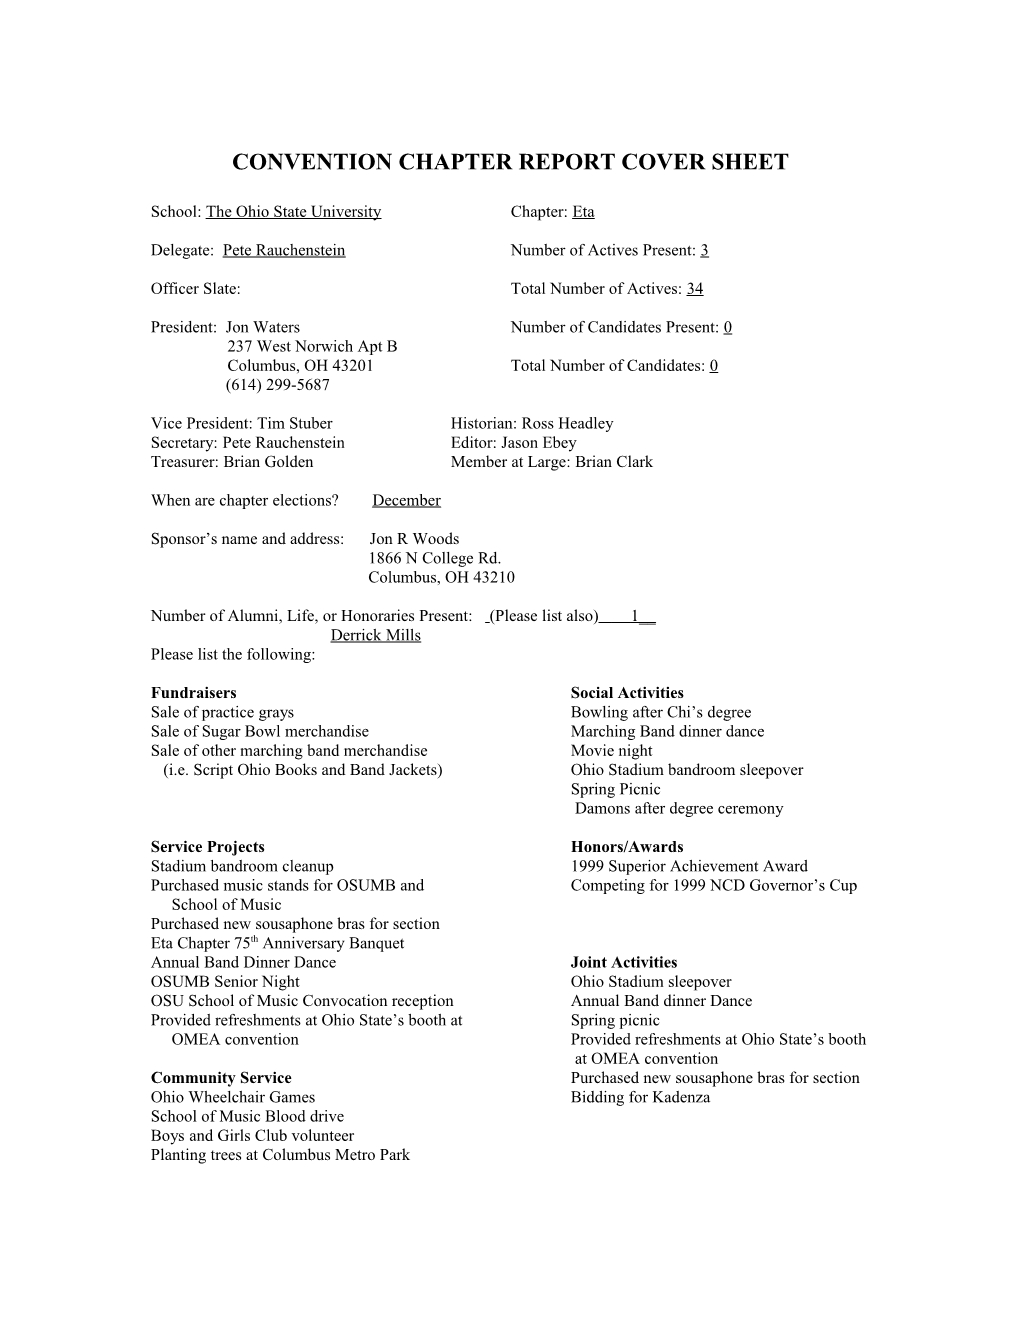 Convention Chapter Report Cover Sheet s2